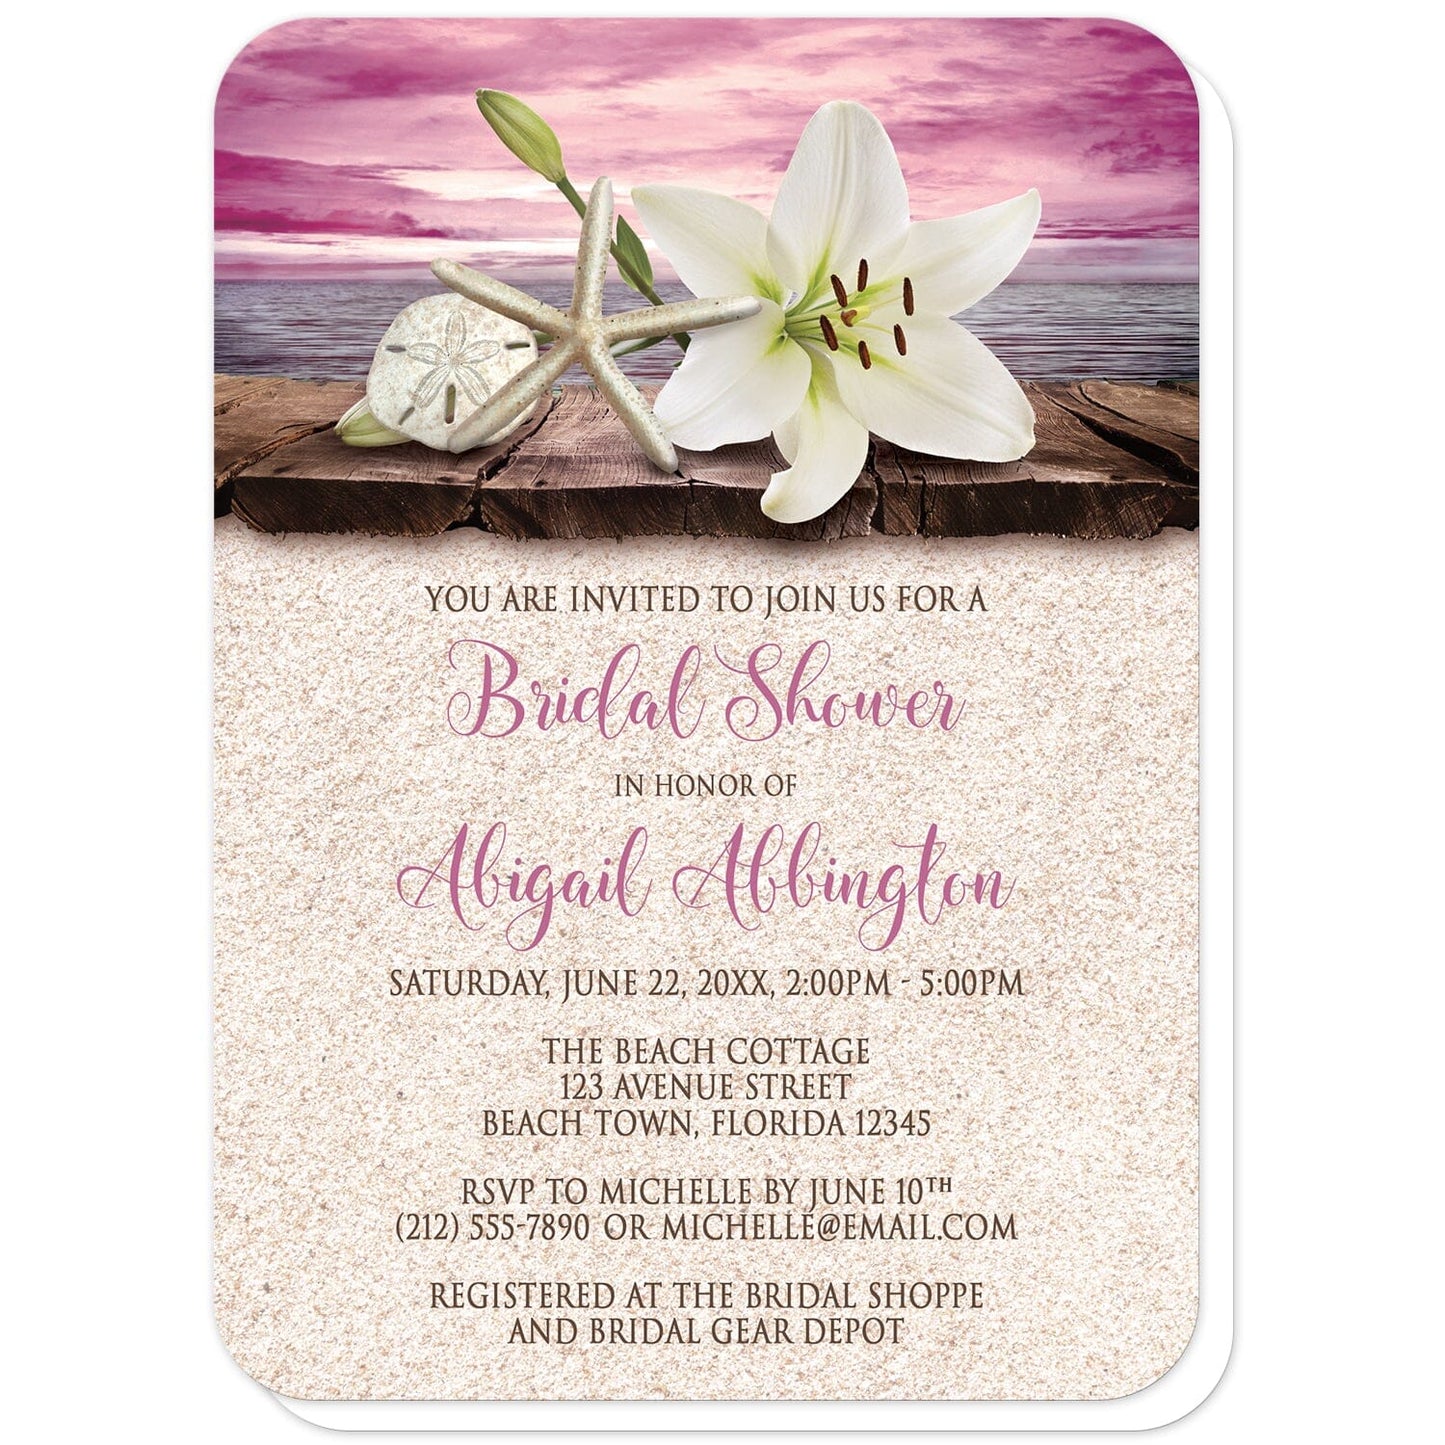 Lily Seashells and Sand Magenta Beach Bridal Shower Invitations (with rounded corners) at Artistically Invited. Tropical lily seashells and sand magenta beach bridal shower invitations with an elegant white lily, a starfish, and a sand dollar on a rustic wood dock overlooking the open water under a magenta sunset sky. Your personalized bridal shower celebration details are custom printed in dark brown and magenta over a beige sand background design.